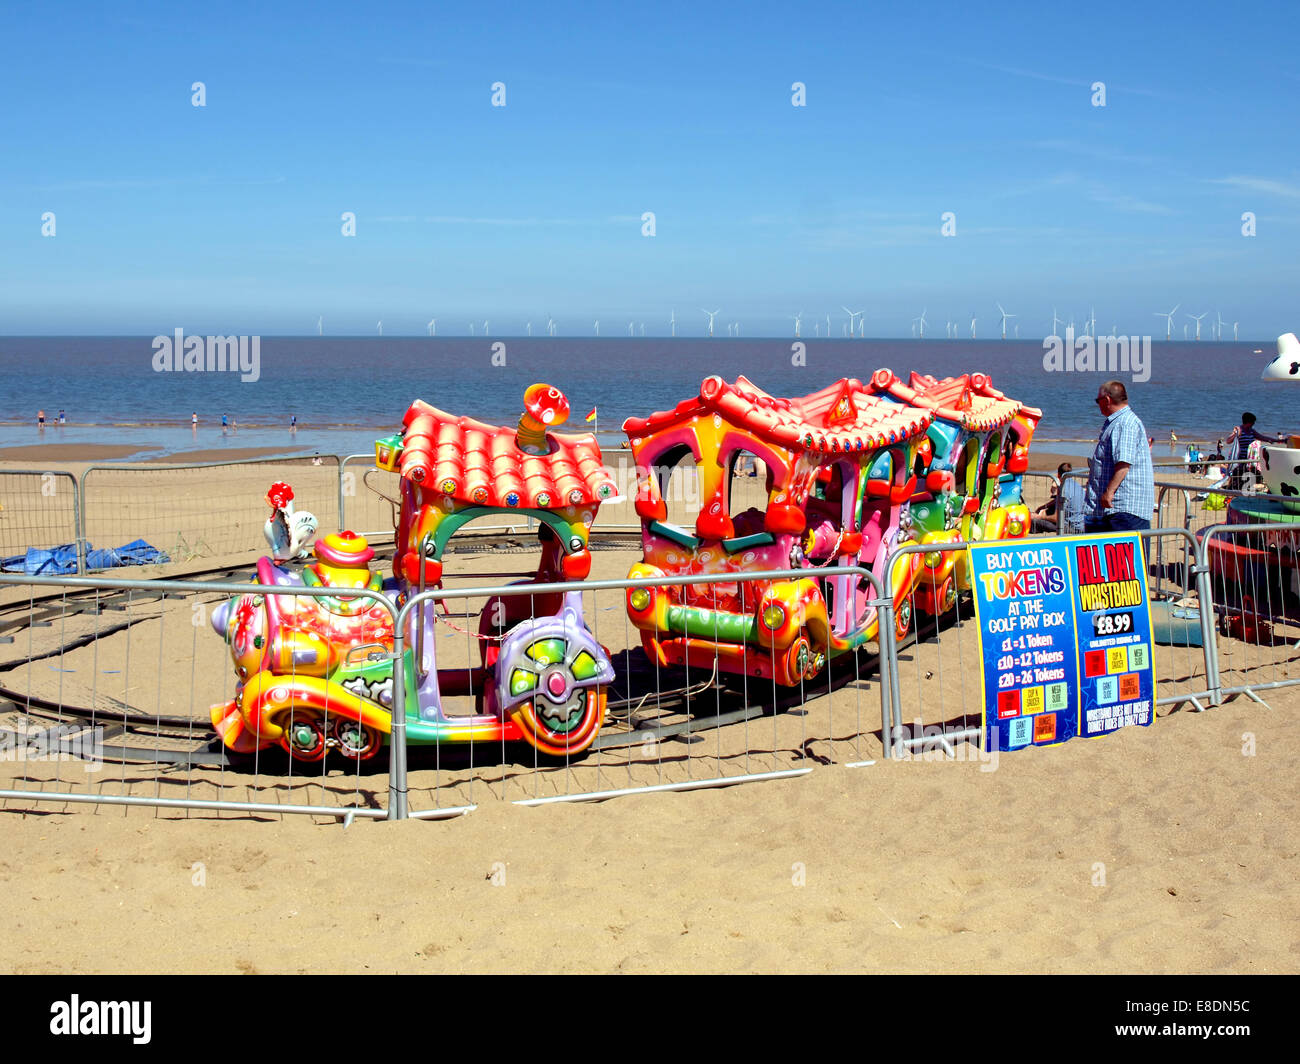 A colorful children's train ride on the sands at Ingoldmells, Skegness, Lincolnshire, England, UK. Stock Photo